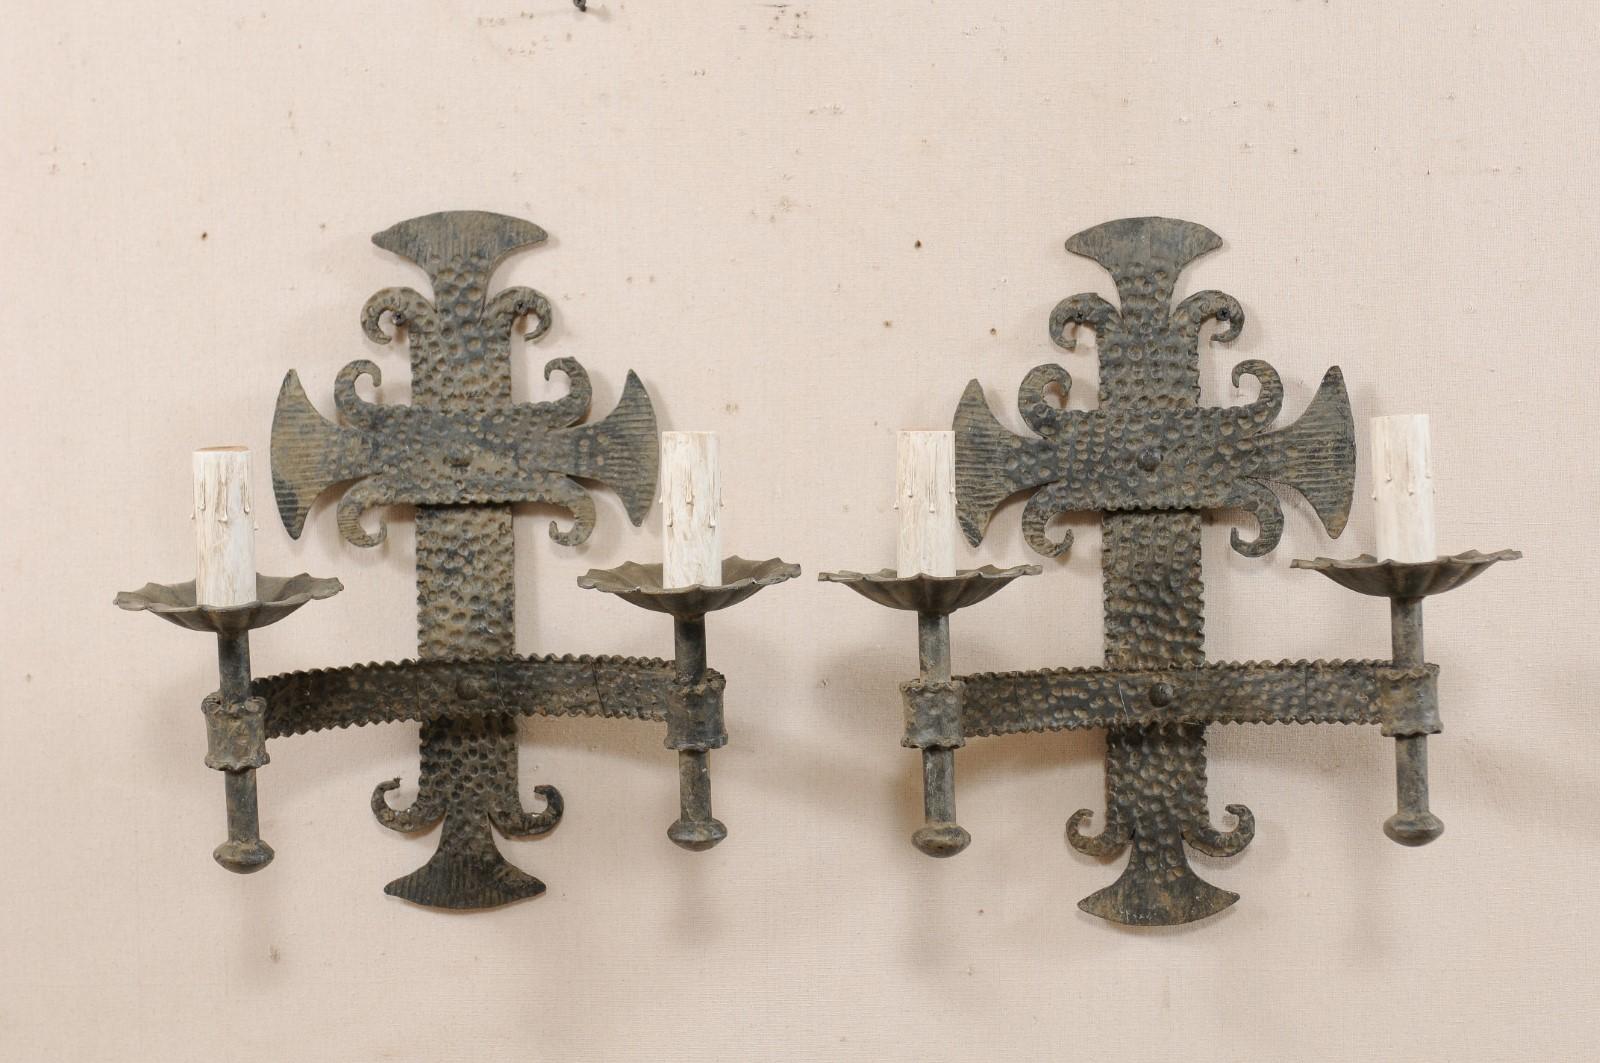 Pair of French two-light iron sconces from the mid-20th century. This vintage pair of sconces from France each feature a stylized fleur de Lis back-plate with hammered texturing, from which a c-shaped arm extends out supporting the torch style